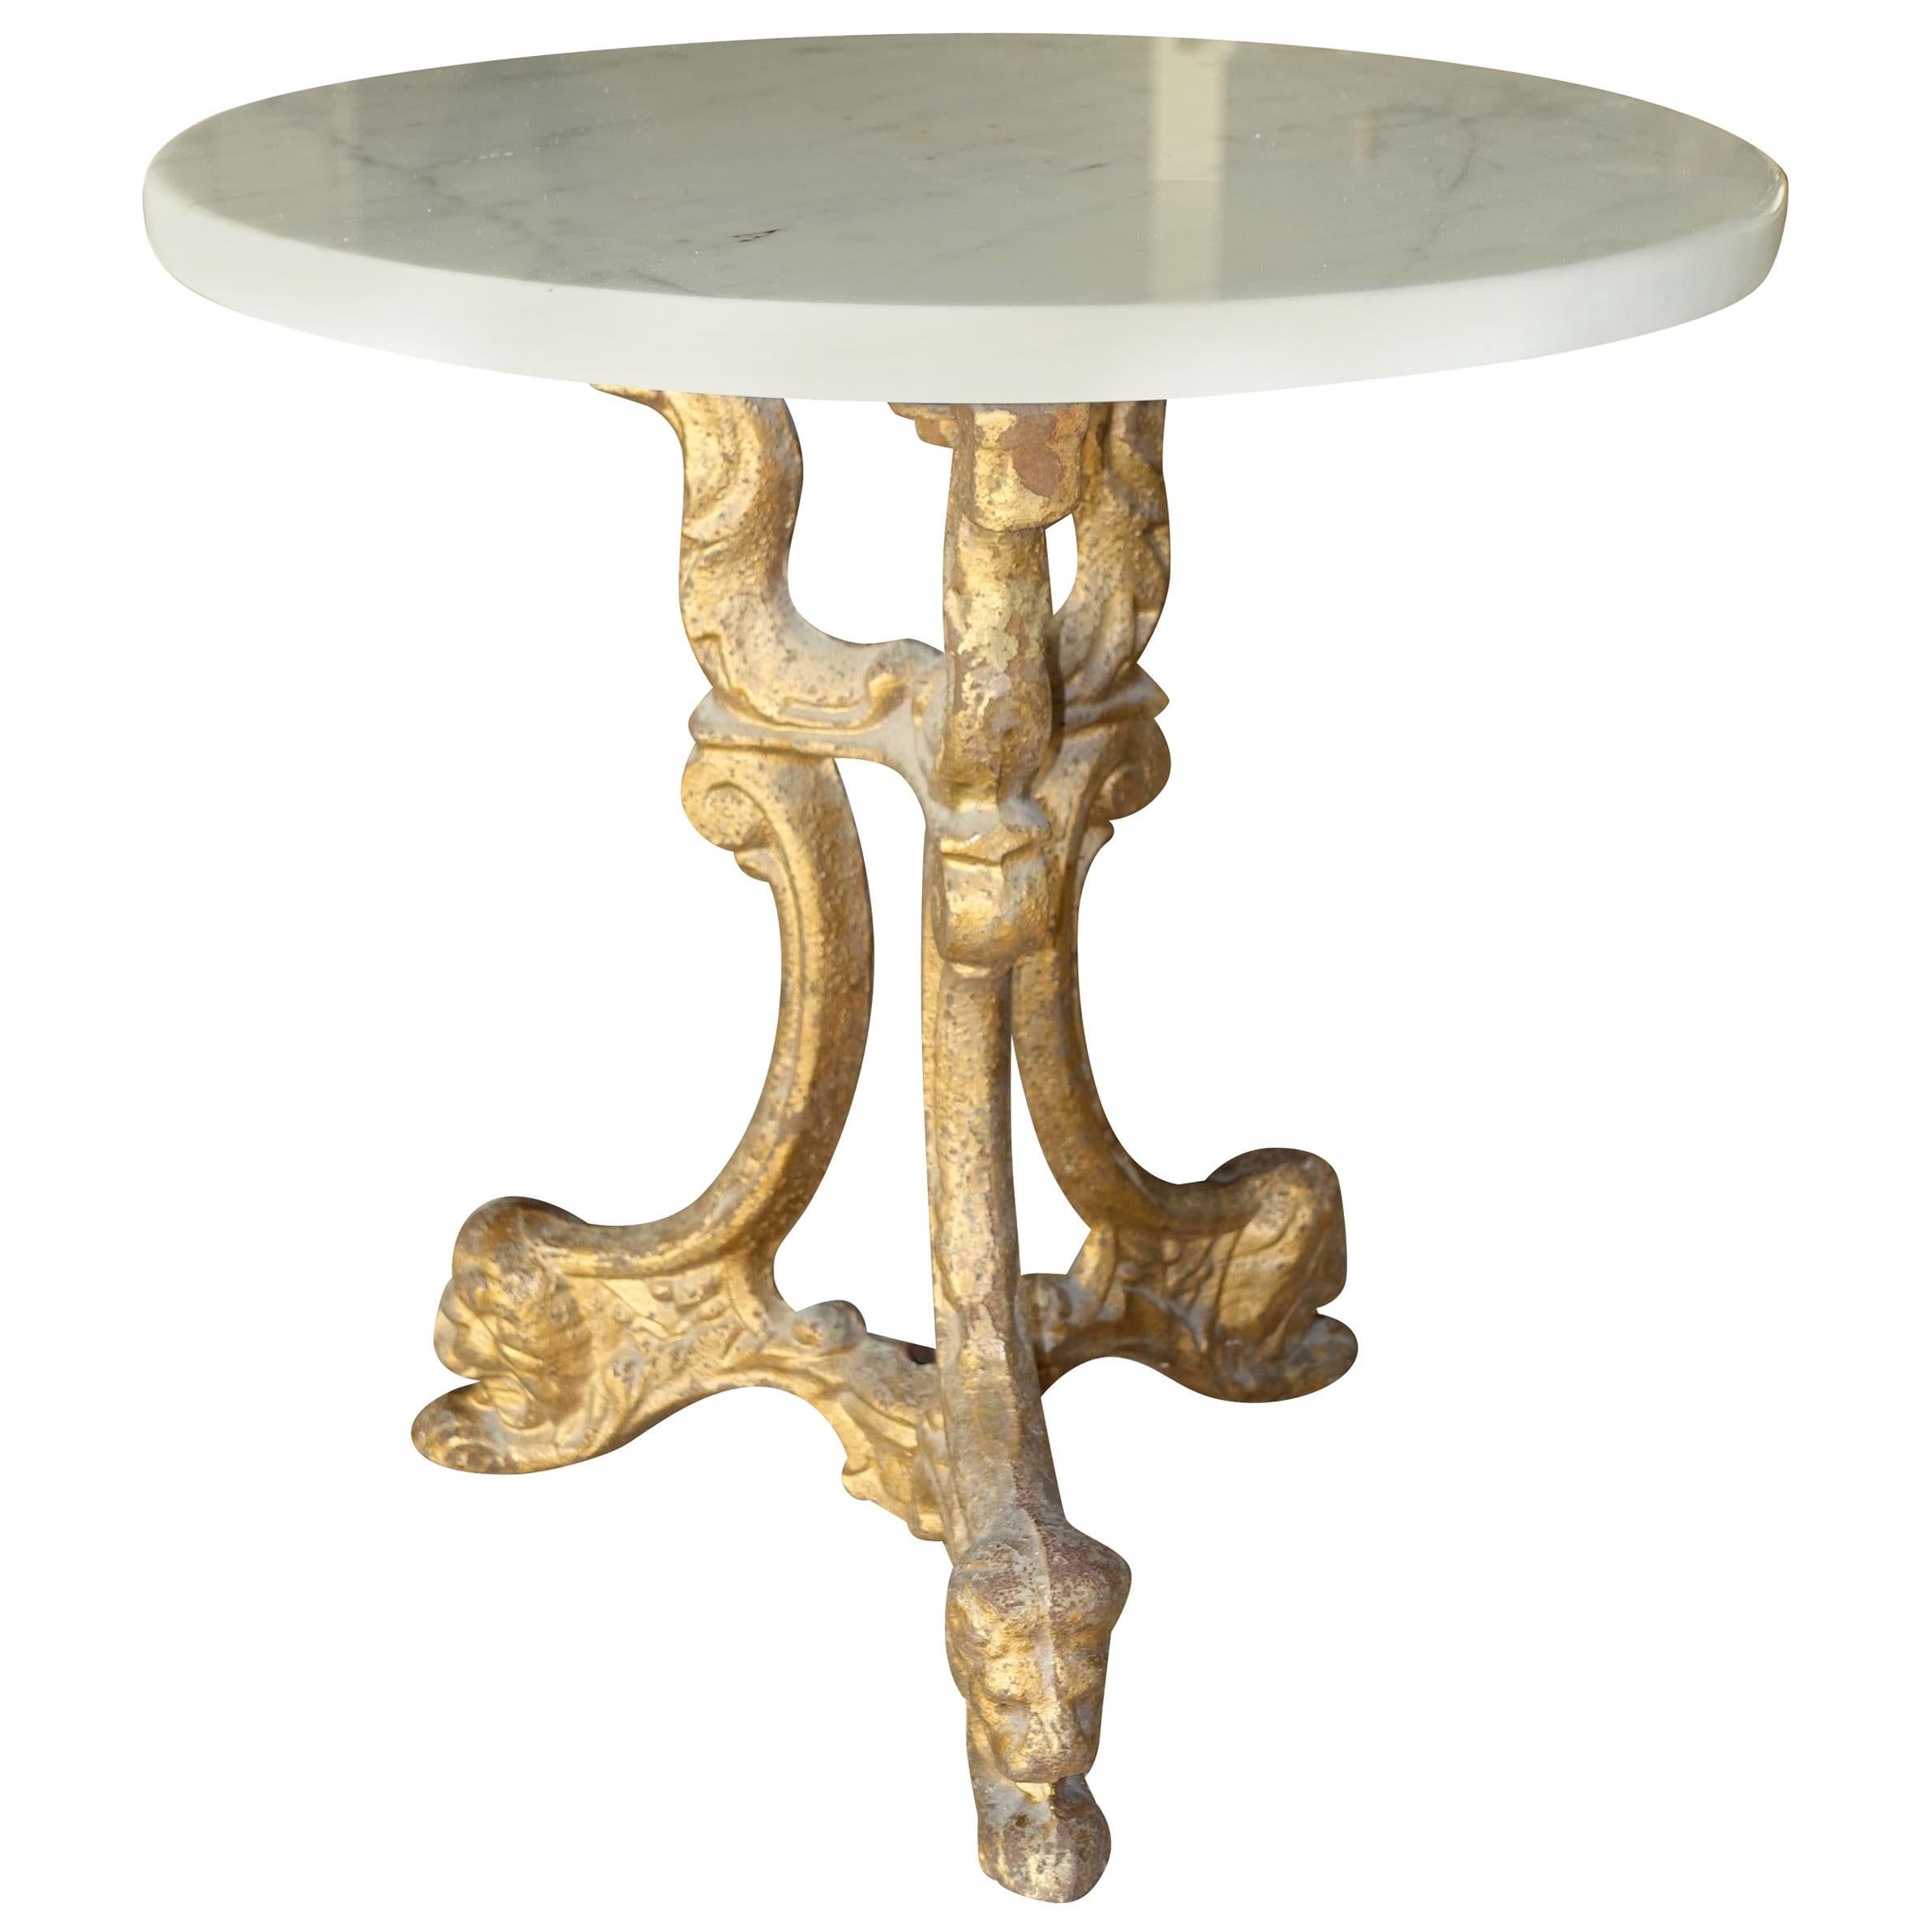 Gold Gilt Metal Cocktail Table, White Marble Top, France, 1920s